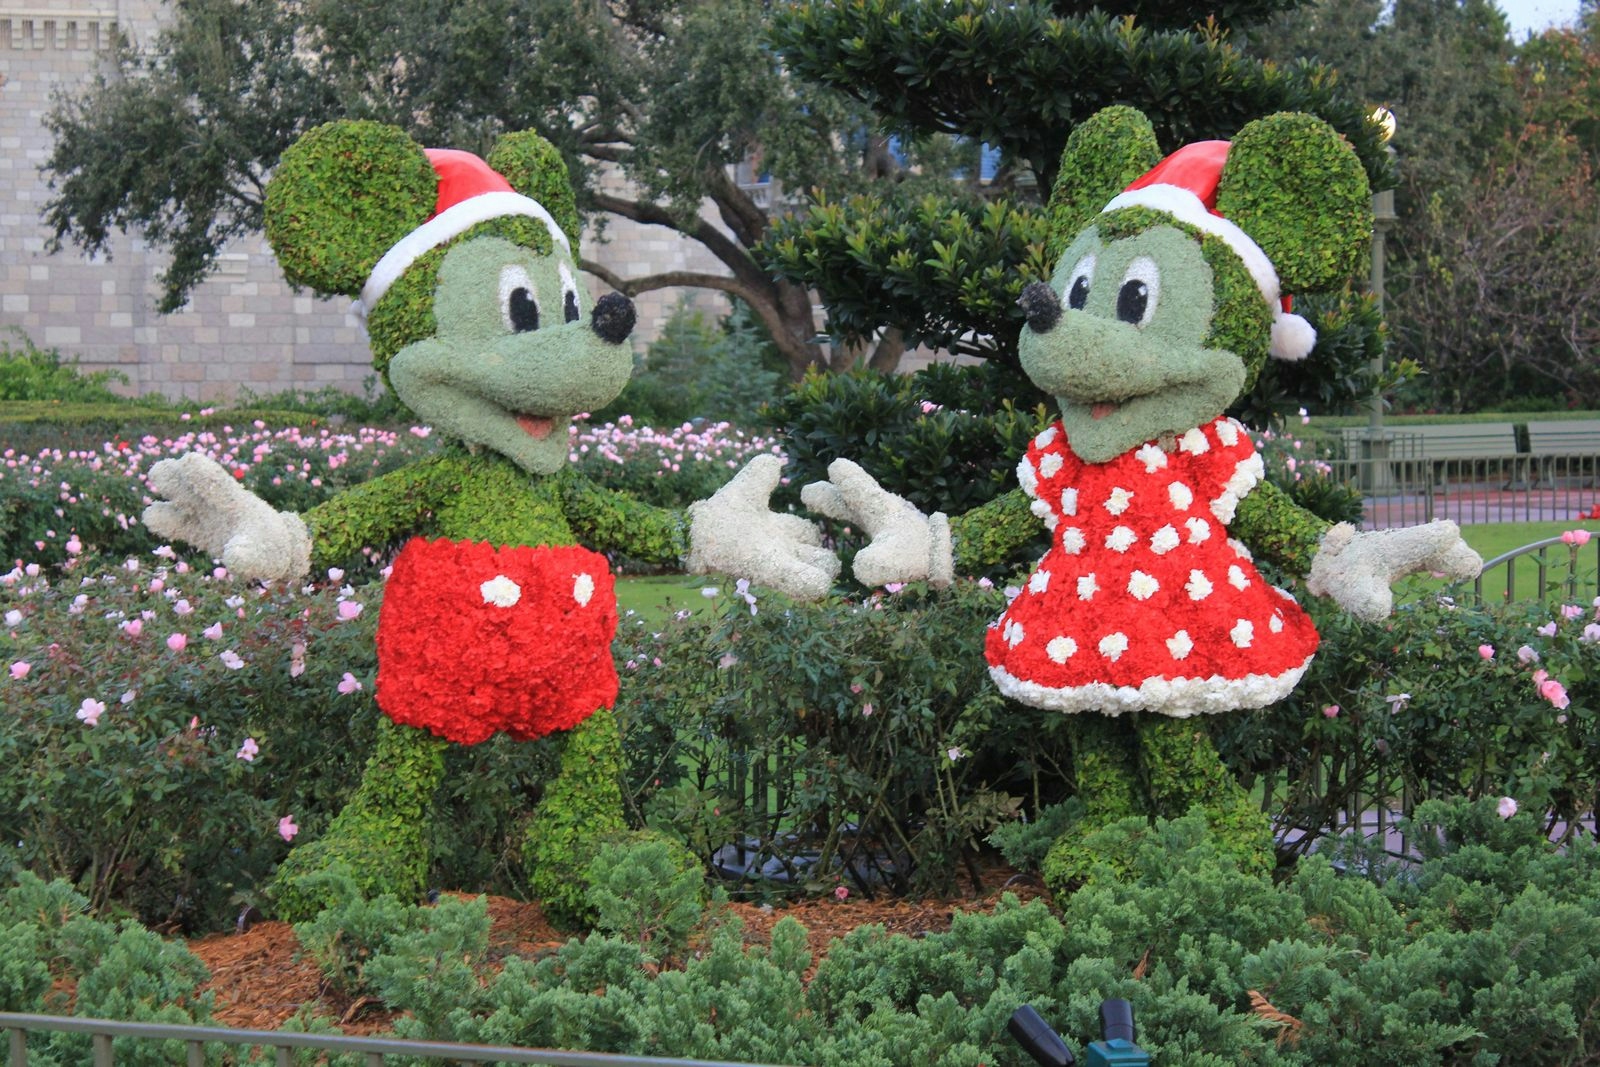 Mickey and Minnie mouse made out of flowers and shrubbery at EPCOT International Flower & Garden Festival